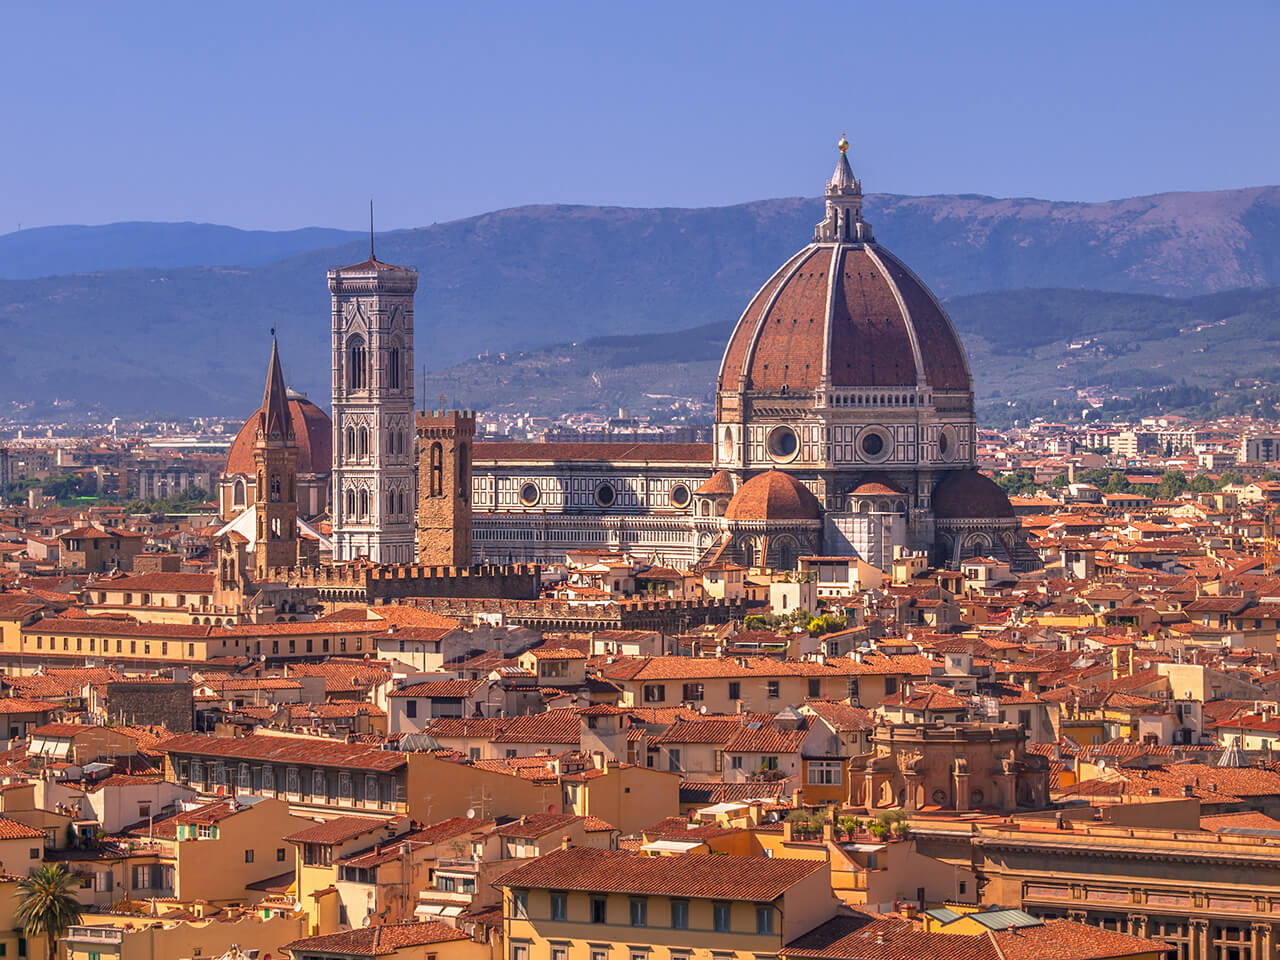 The Brunelleschi Dome, one of the top things to see in Tuscany in April